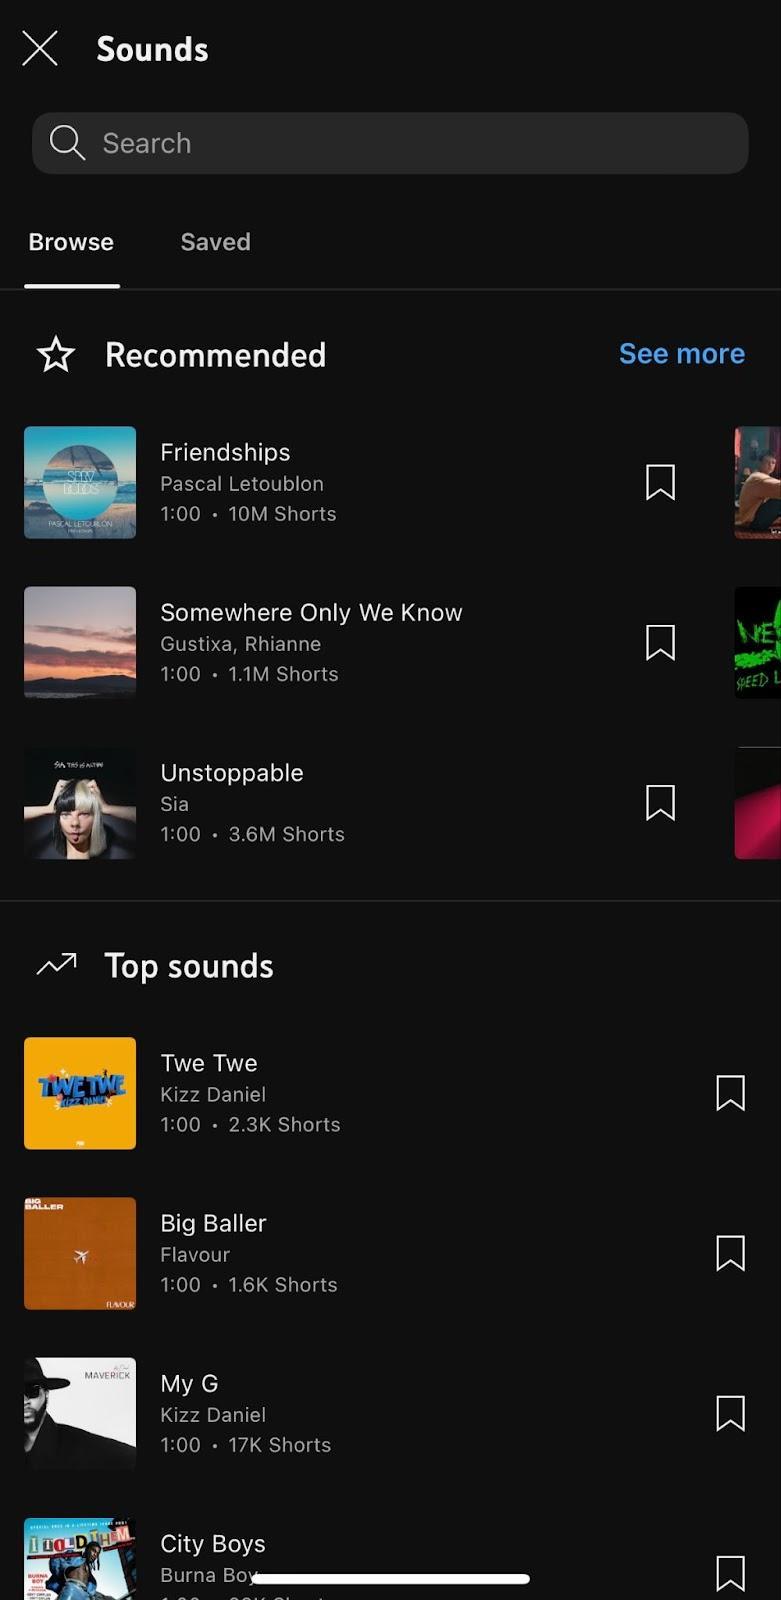 YouTube Shorts sounds tab with recommended and top sounds